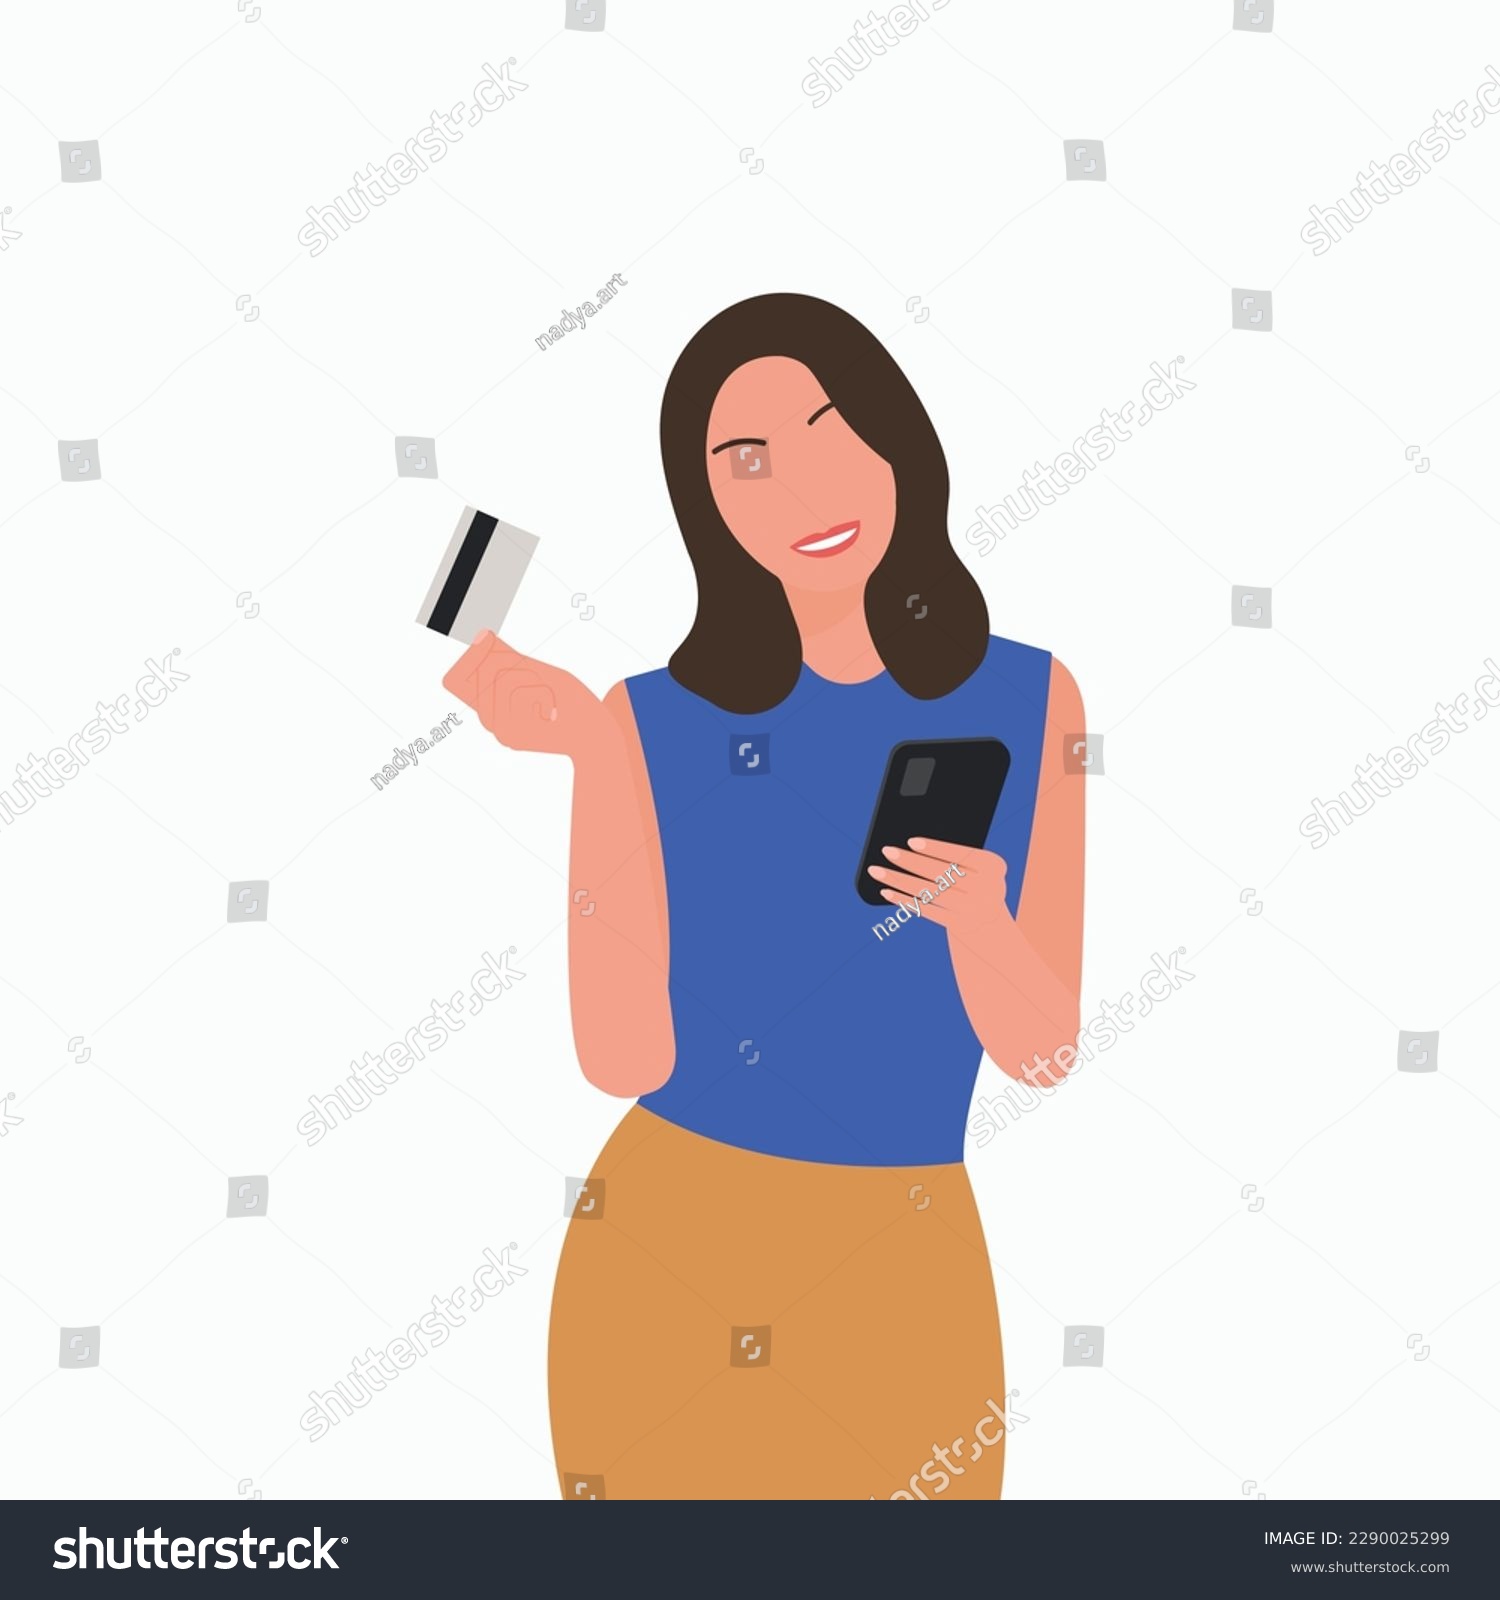 SVG of Young woman holding card  in one hand and phone in another hand with smile on her face. Standing pose isolated faceless silhouette female cartoon character Flat vector illustration. White background.  svg